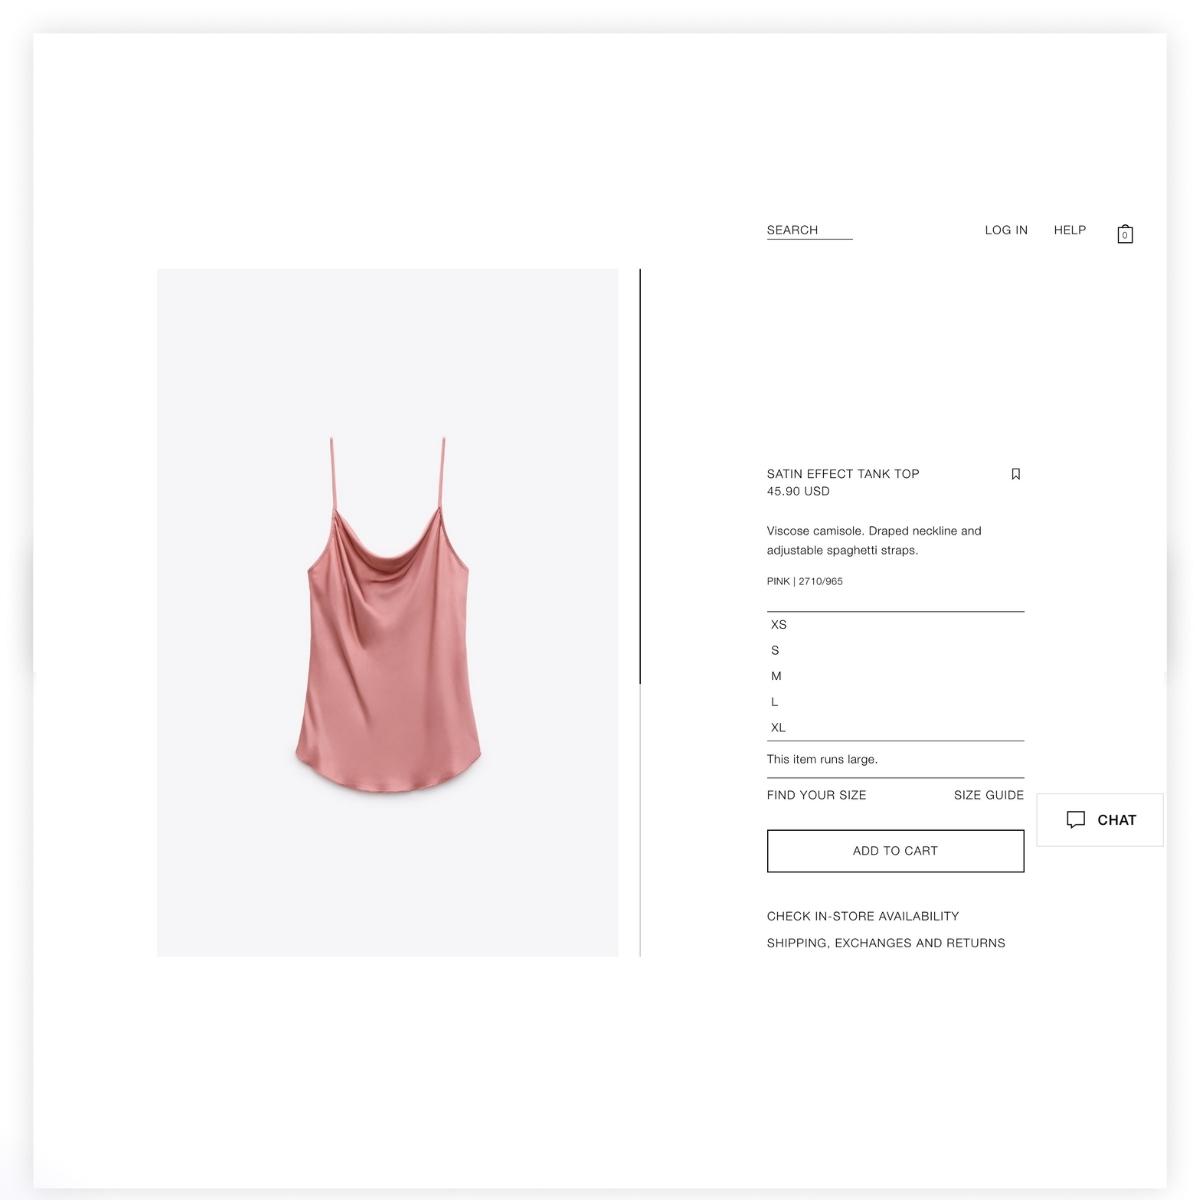 A satin, rose colored tanktop from Zara